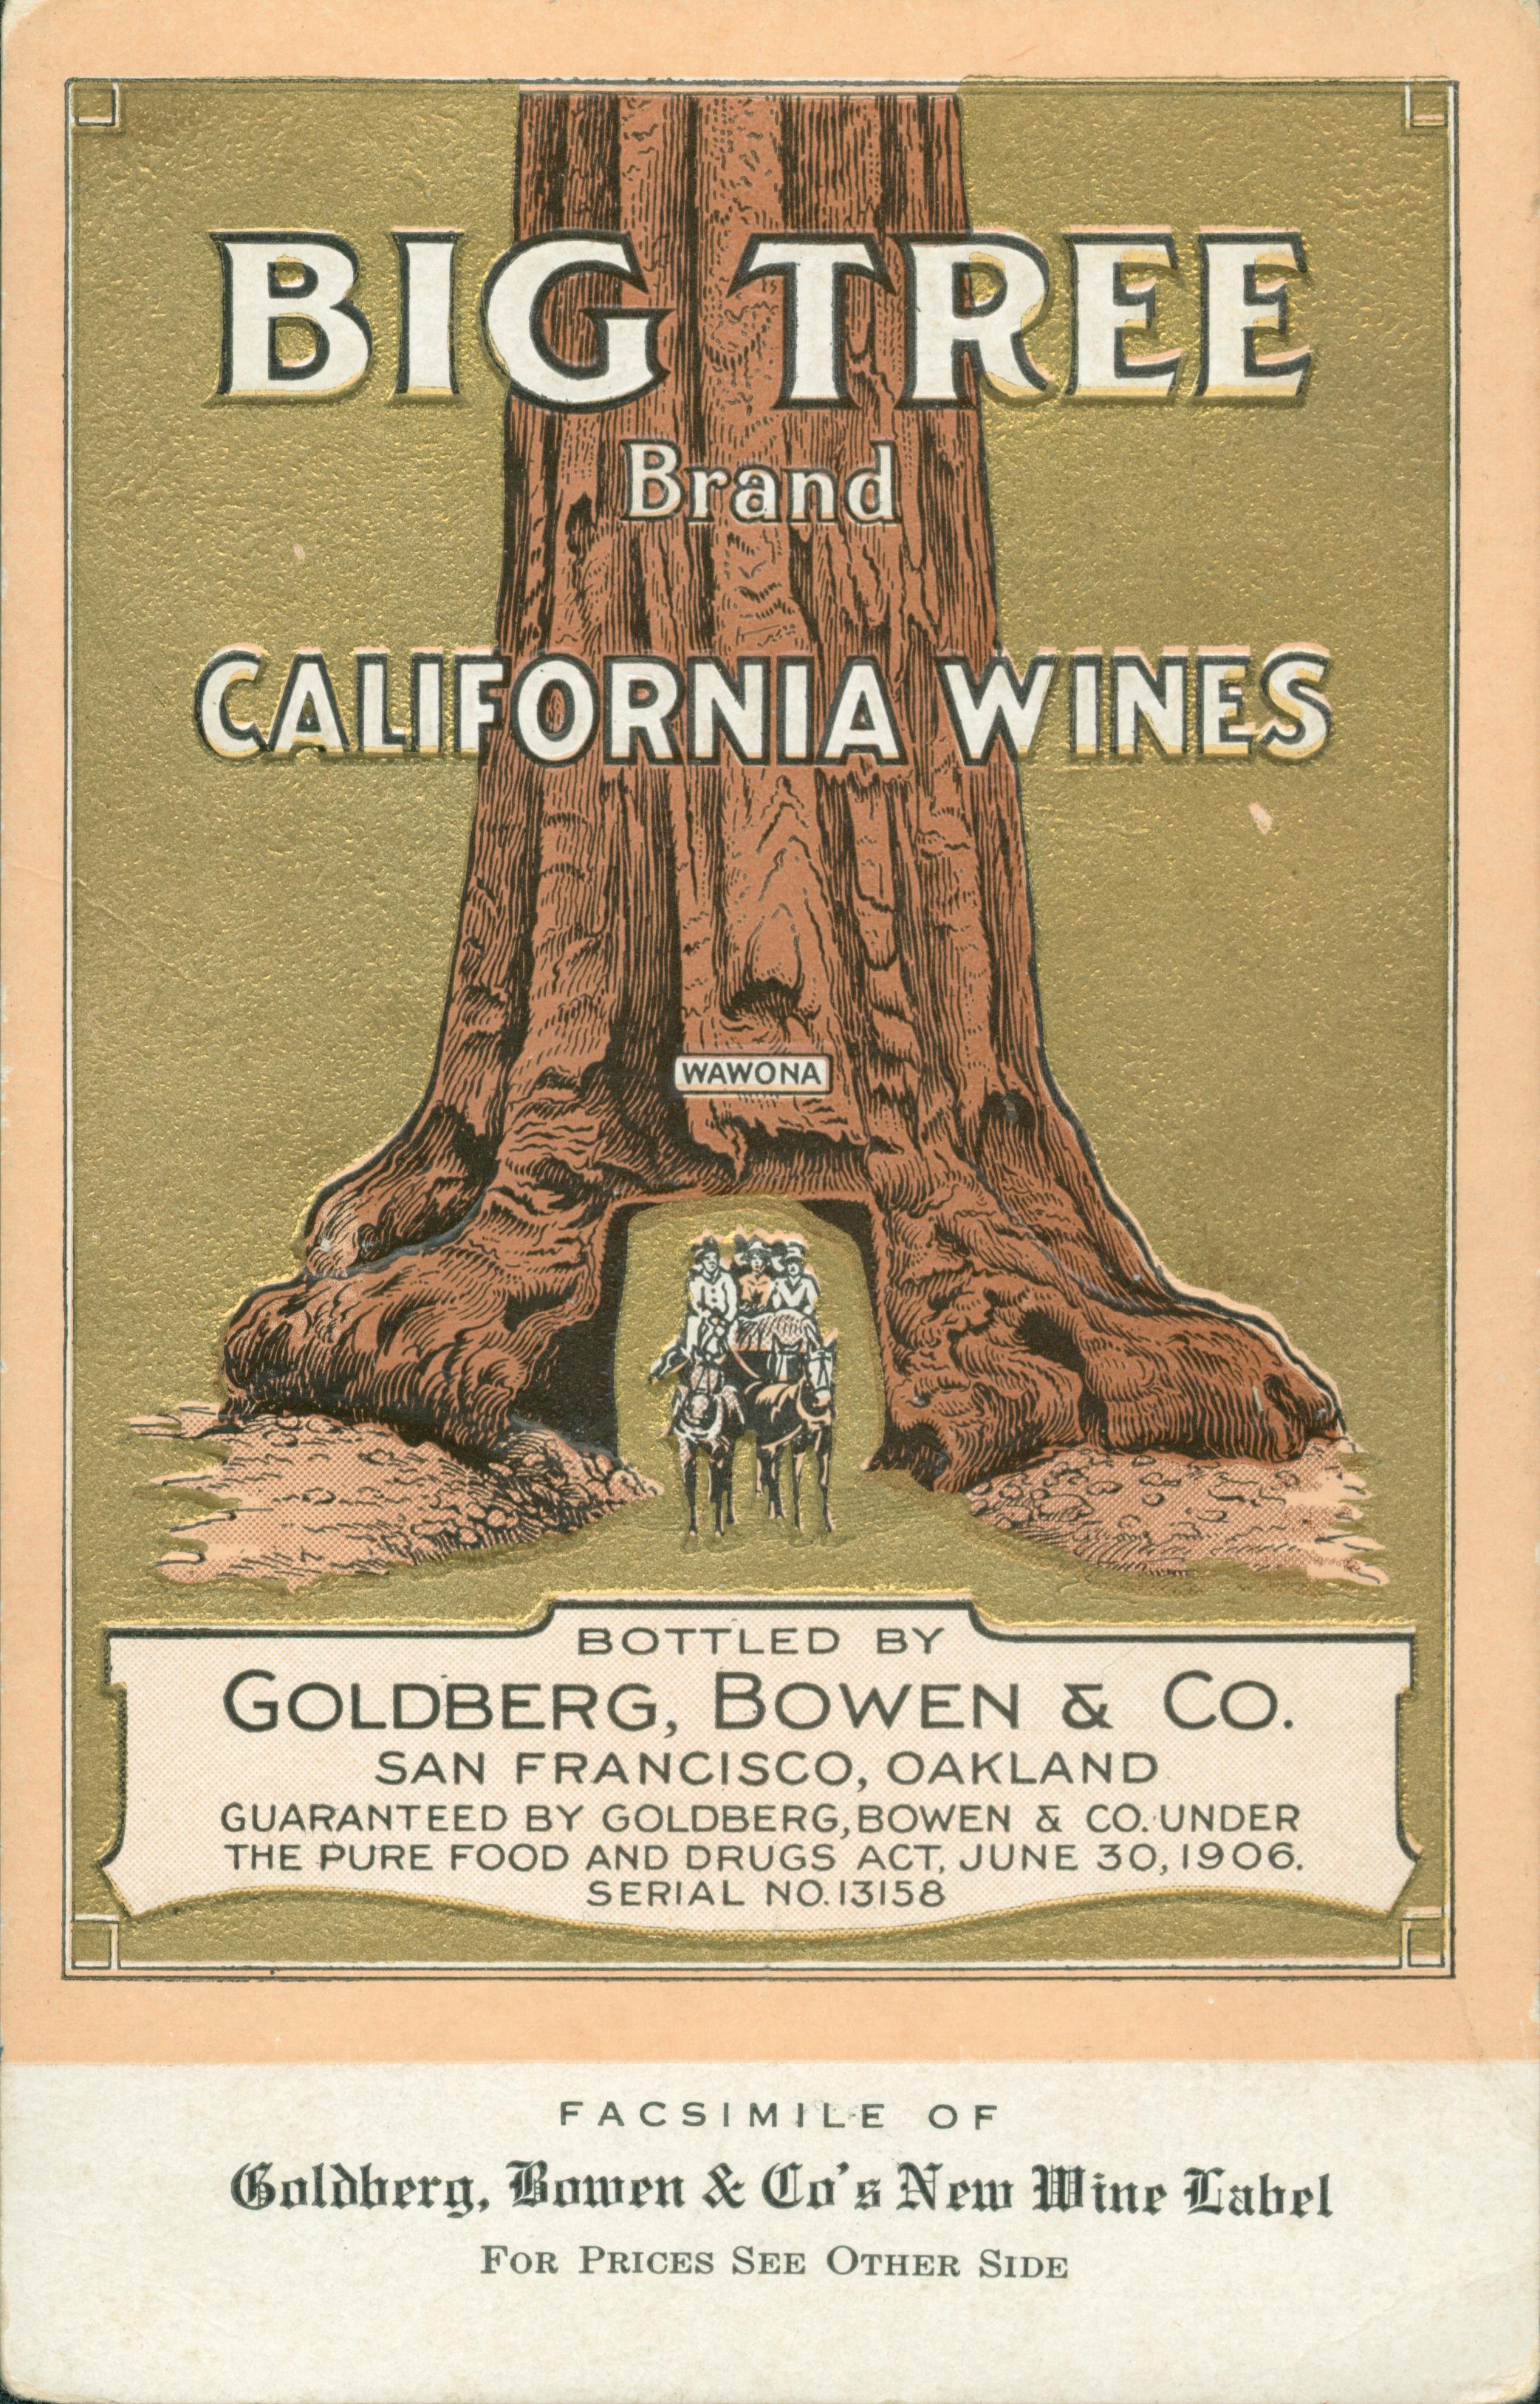 This wine label shows a wagon full of people going through the Wawona tree.